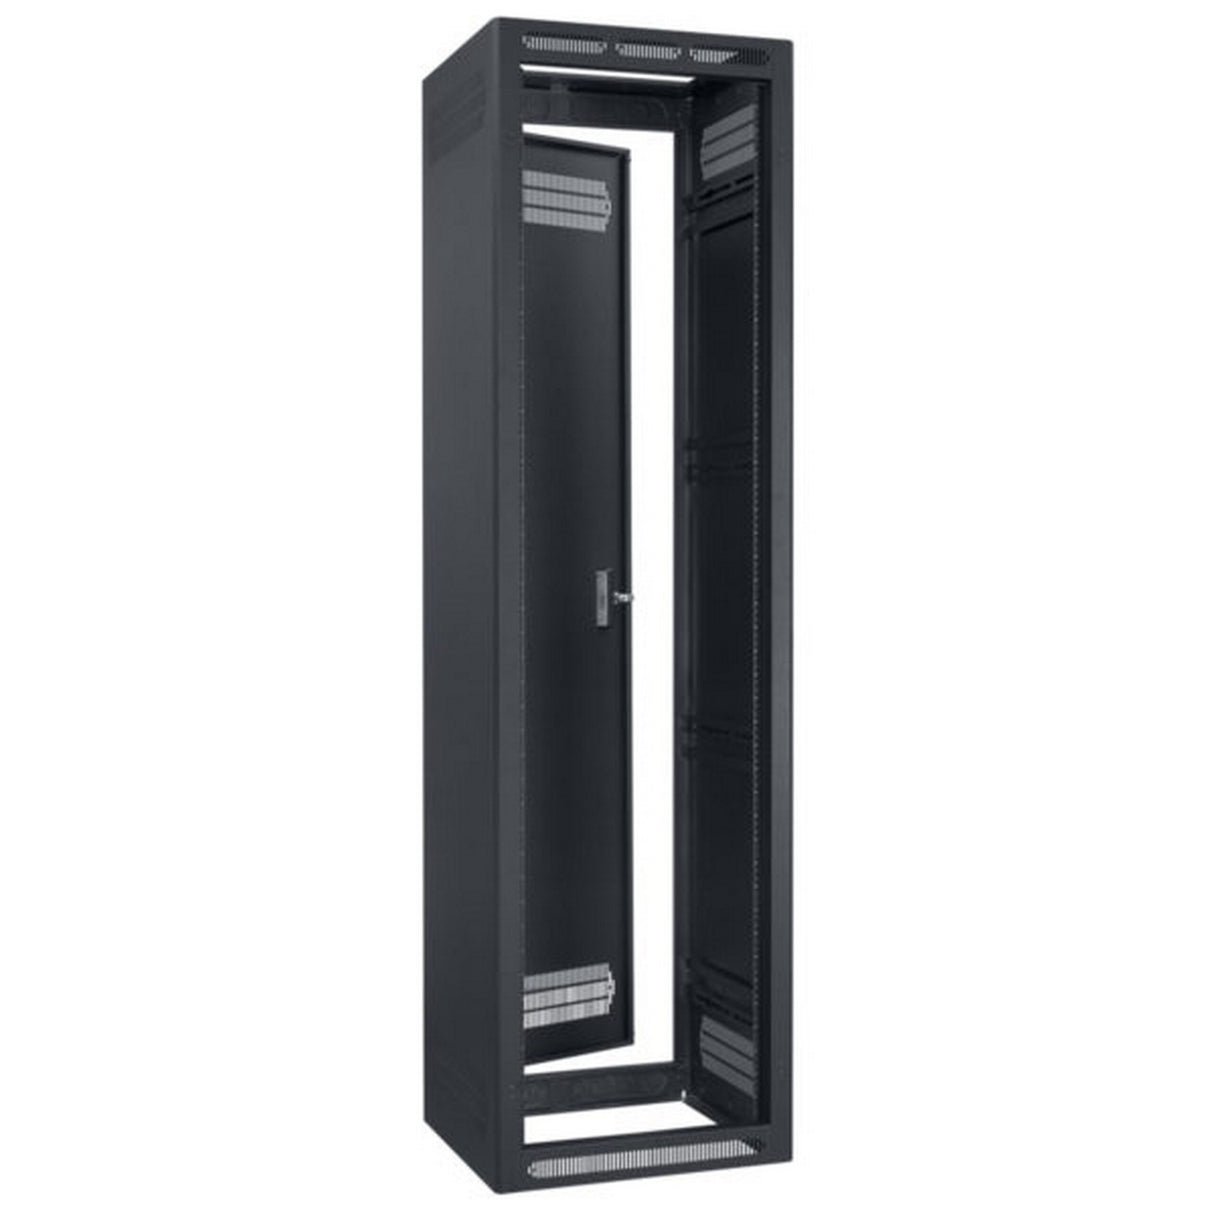 Lowell LER-4432 Enclosed Rack with Rear Door, 44 x 32 Inch